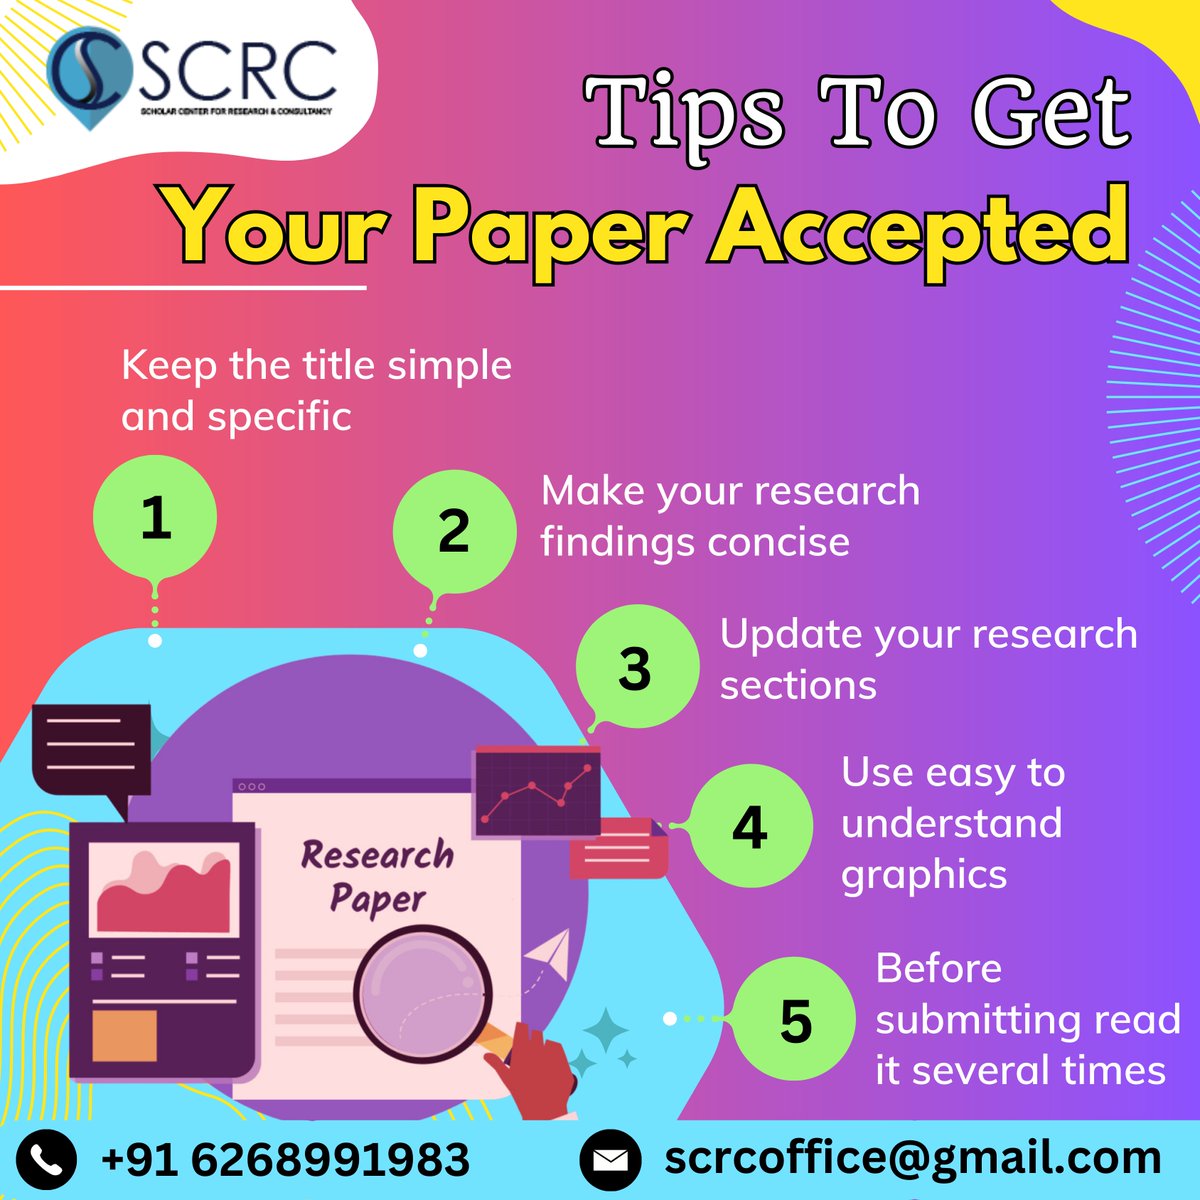 Tips To Get Your Paper Accepted
Call us: 6268991983
Mail us: scrcoffice@gmail.com
Visit: thescrc.org
#phdtips #phdresearch #Vijayakanth #DMDK #CongressFoundationDay #passedaway #Leo2 #DelhiFog #BusAccident #BiharPolitics #SalaarCeaseFire #ArunJaitley